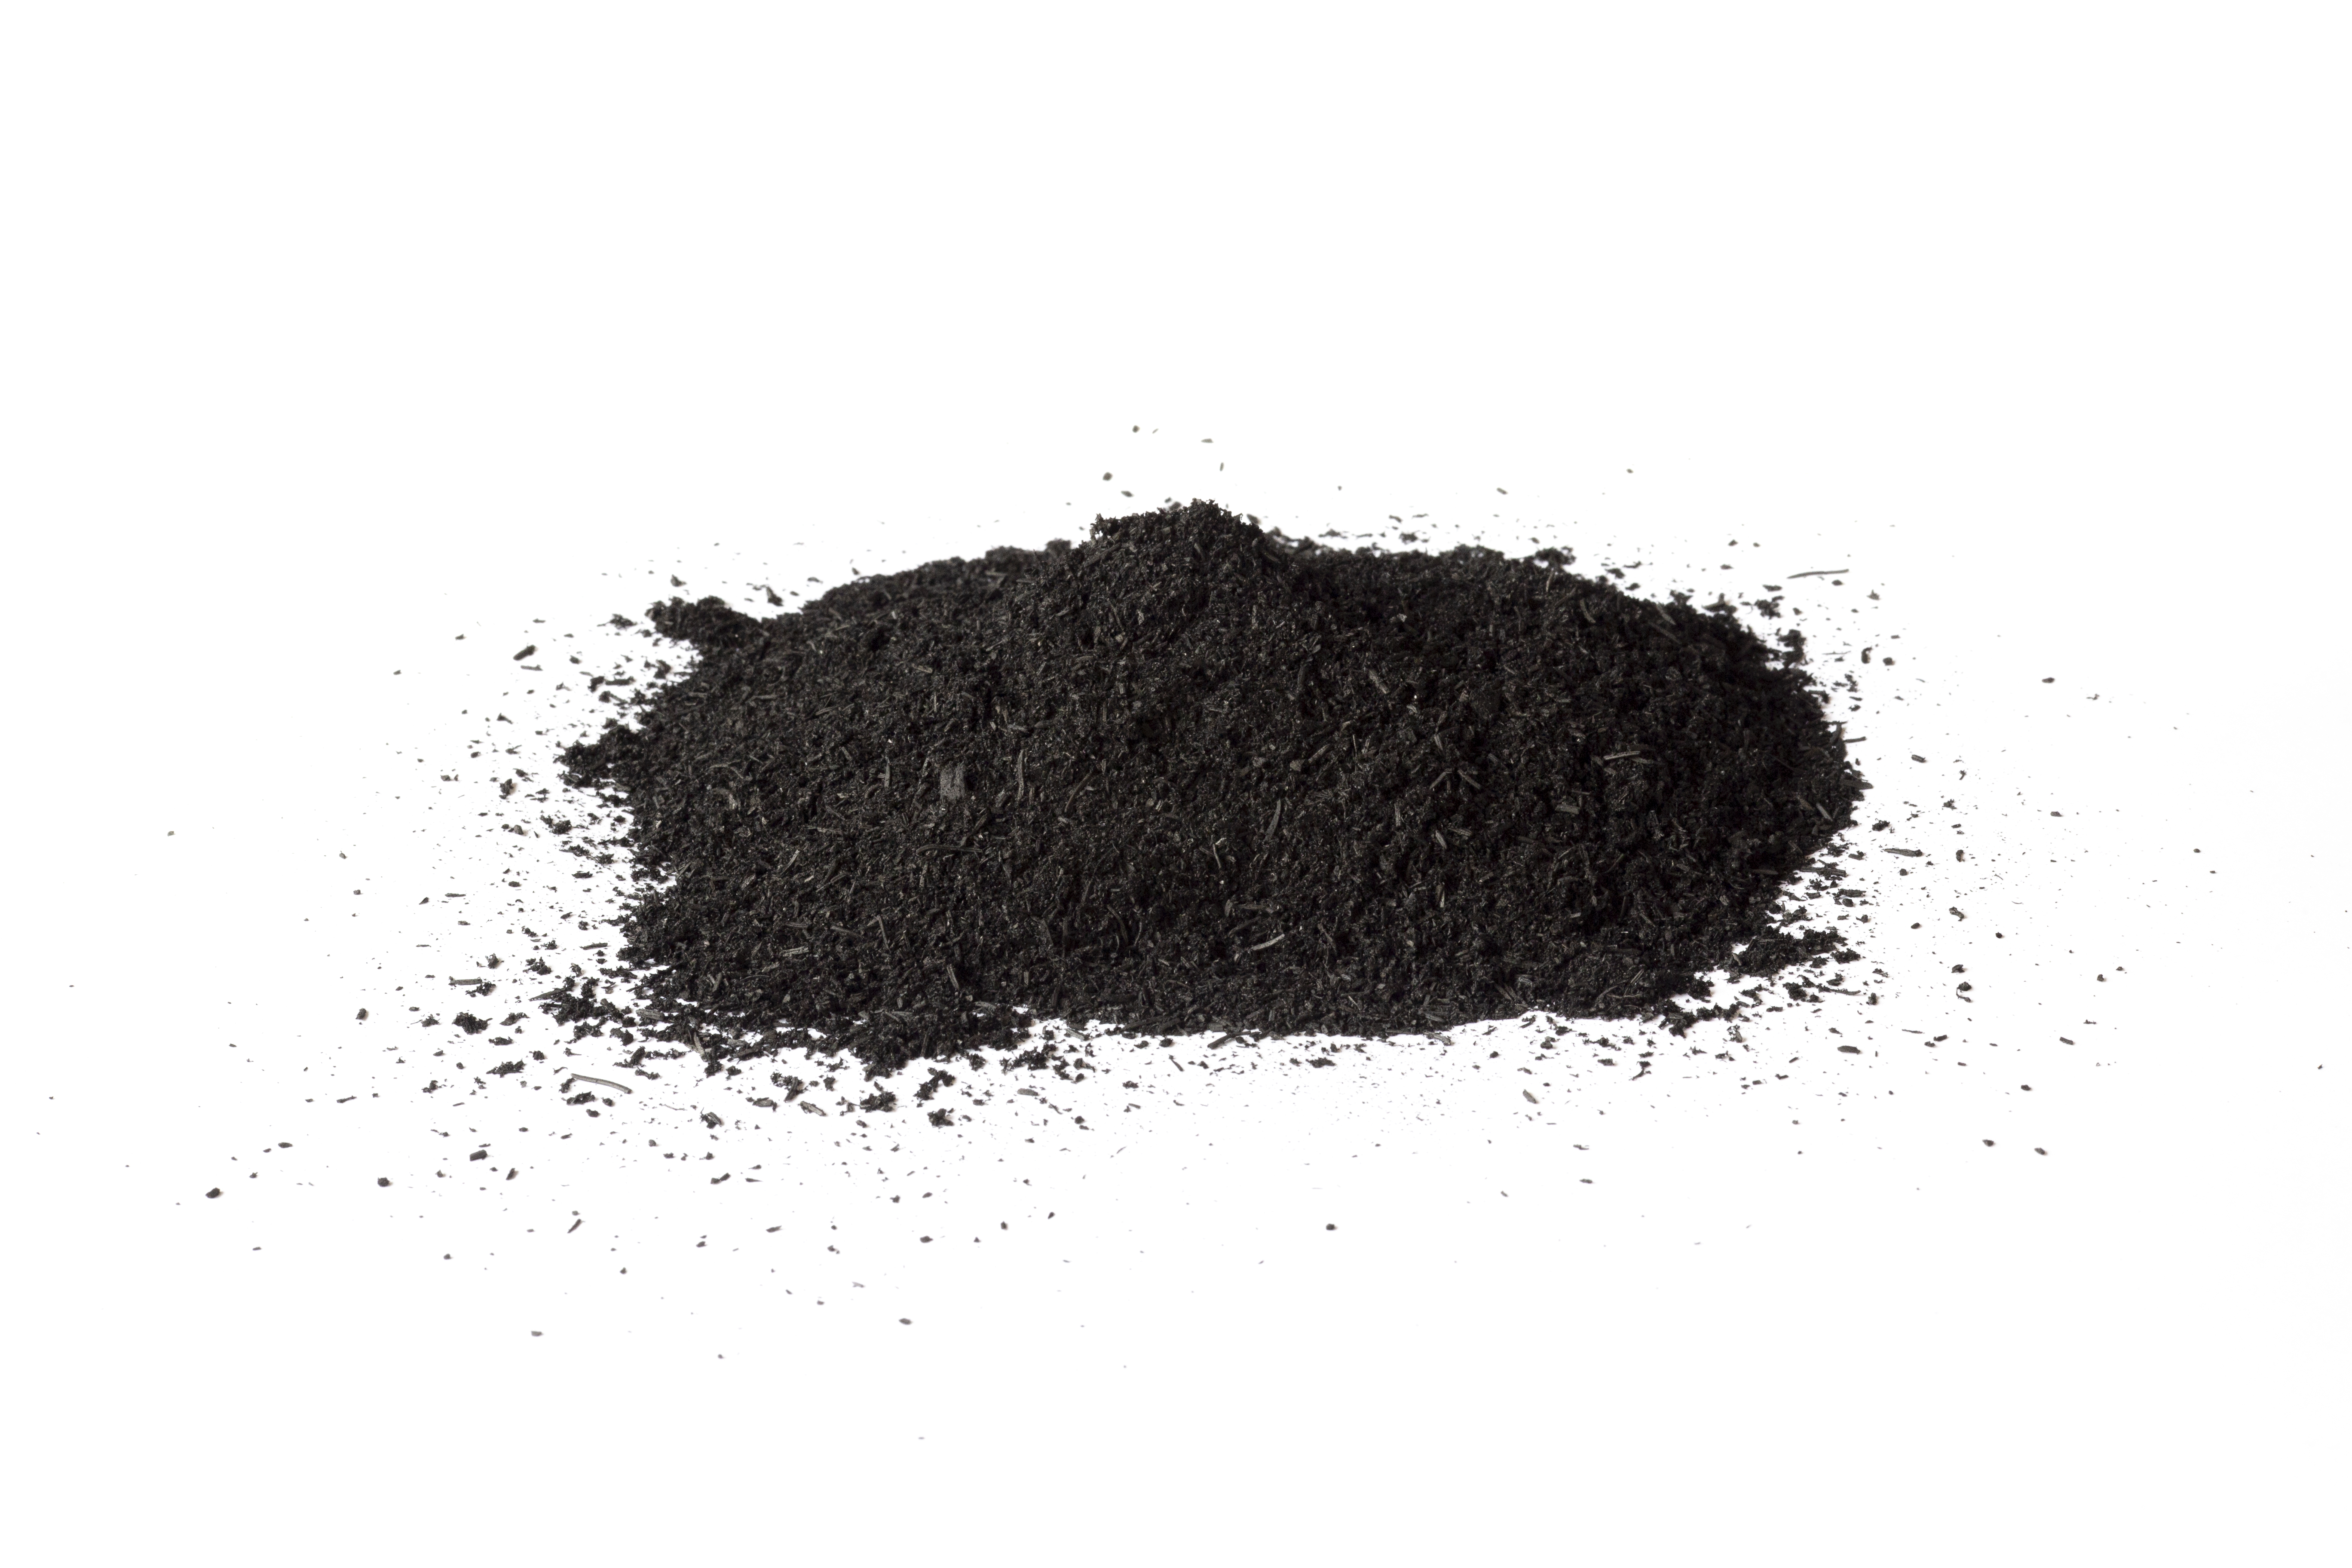 Small heap of black, finely structured biochar.